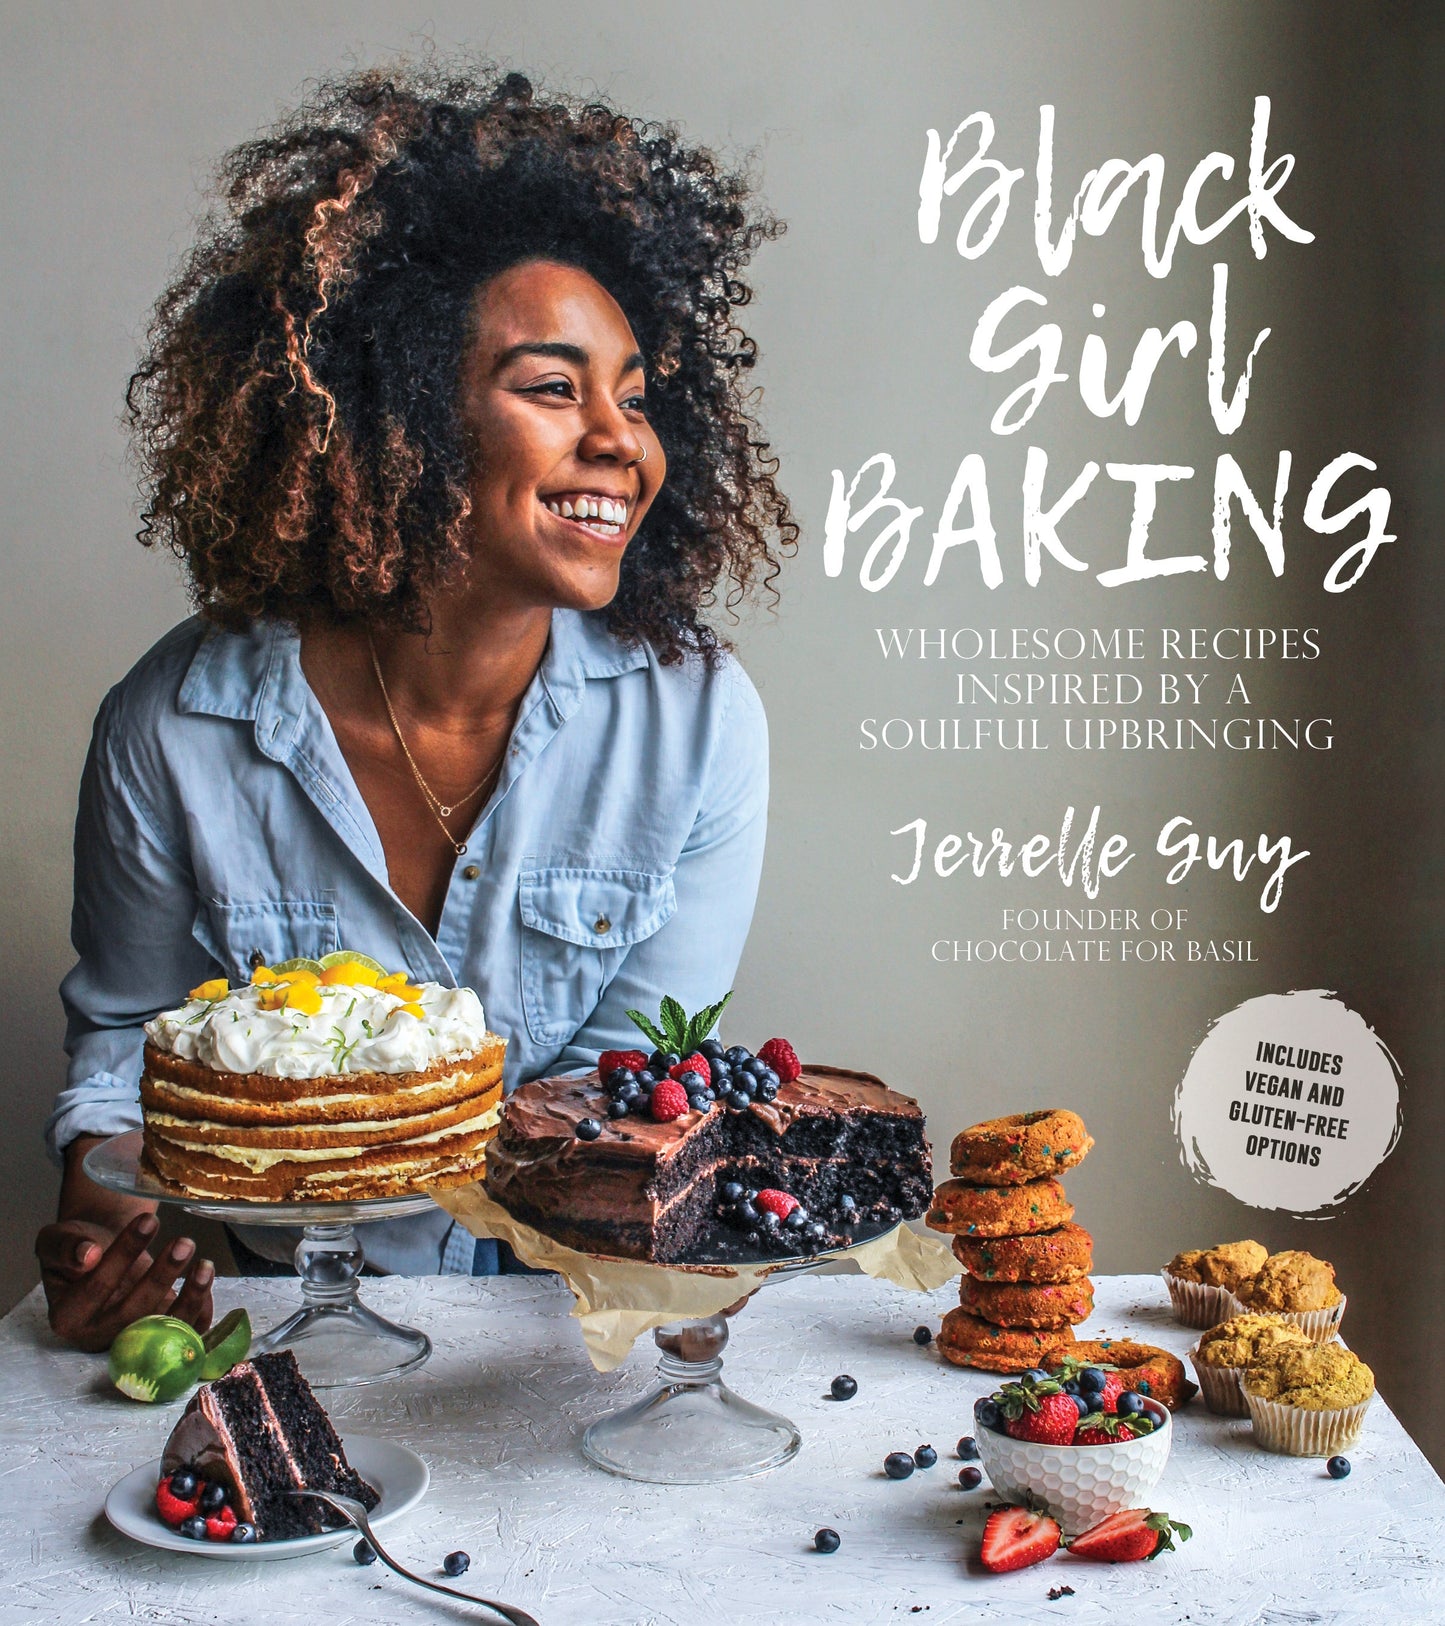 Black Girl Baking // Wholesome Recipes Inspired by a Soulful Upbringing